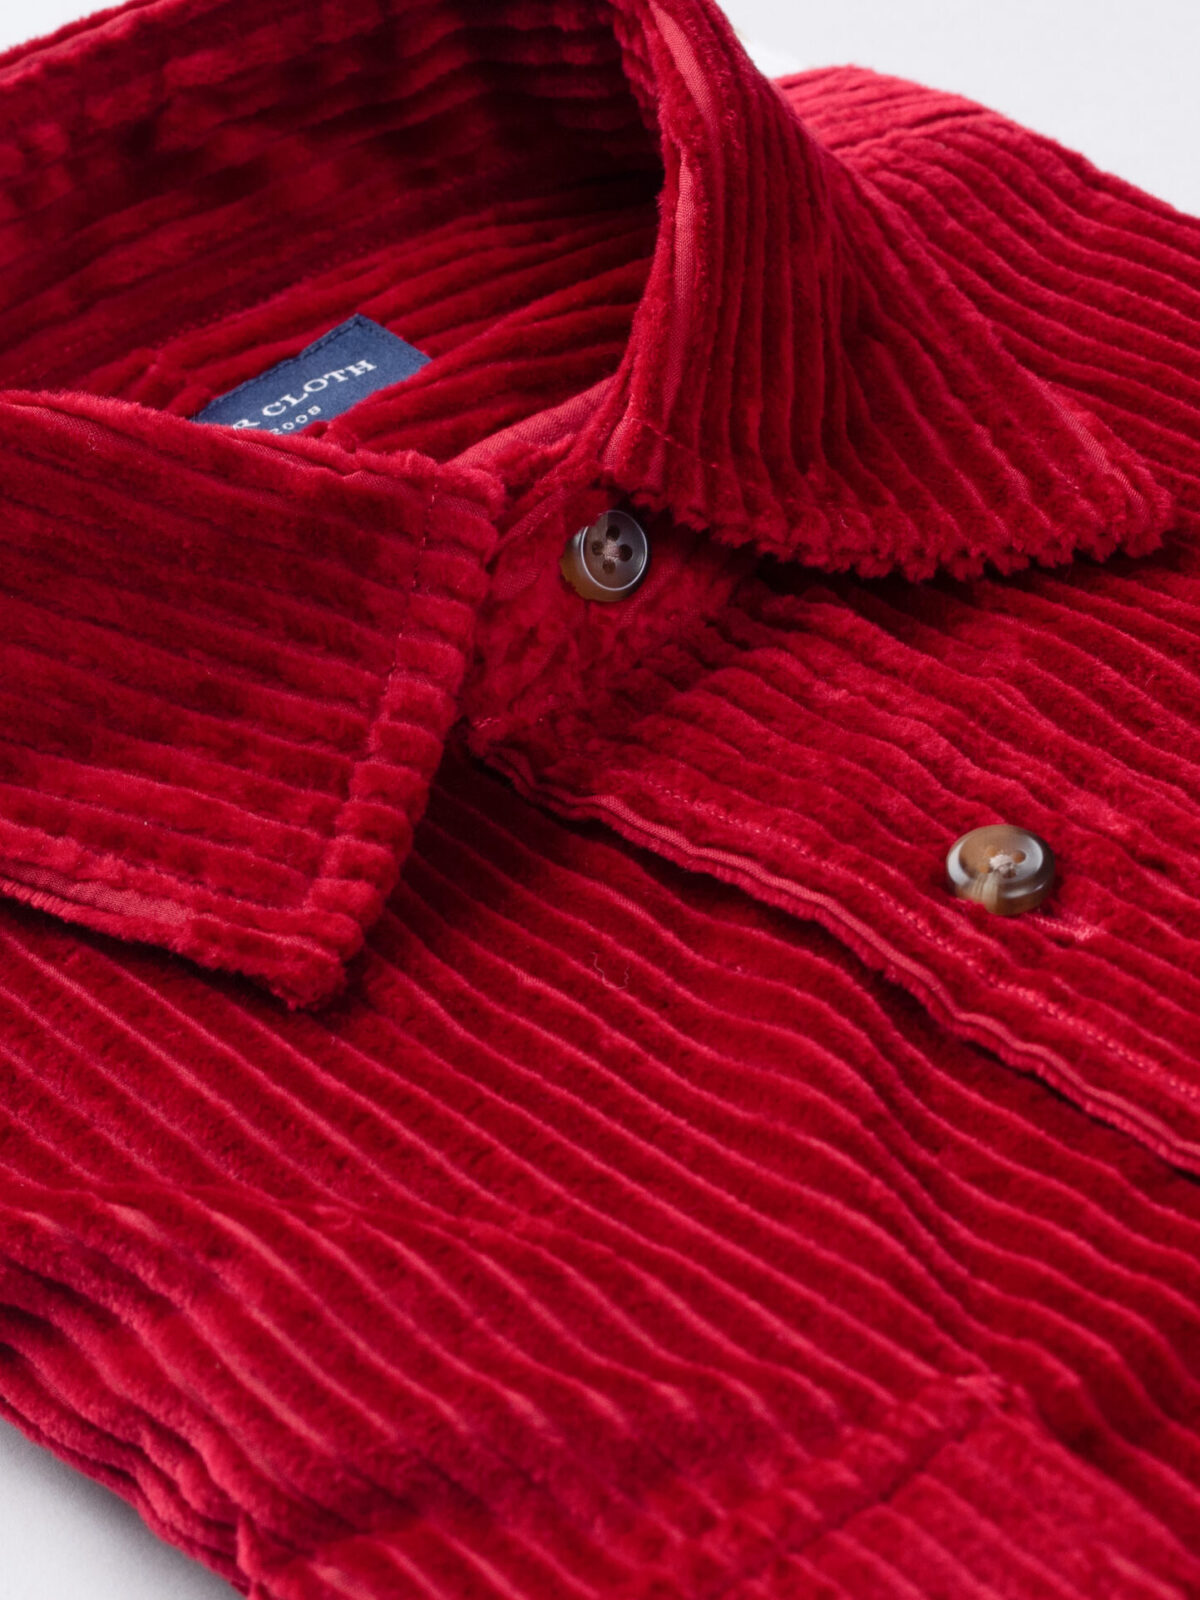 Duca Visconti Red Supima Wide Corduroy Shirt by Proper Cloth